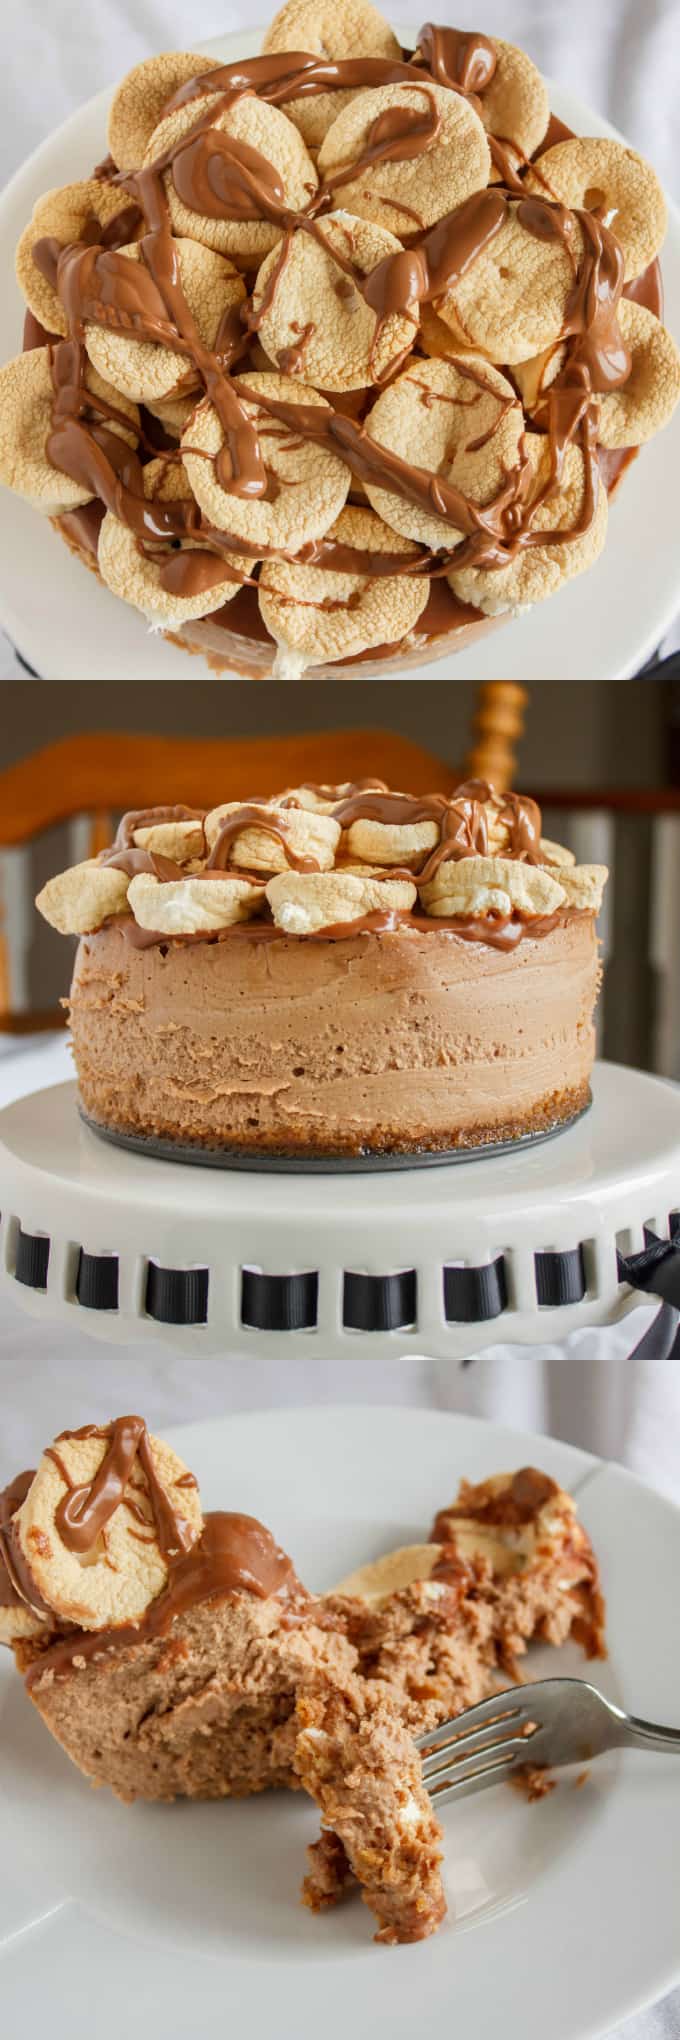 S'mores Cheesecake 3